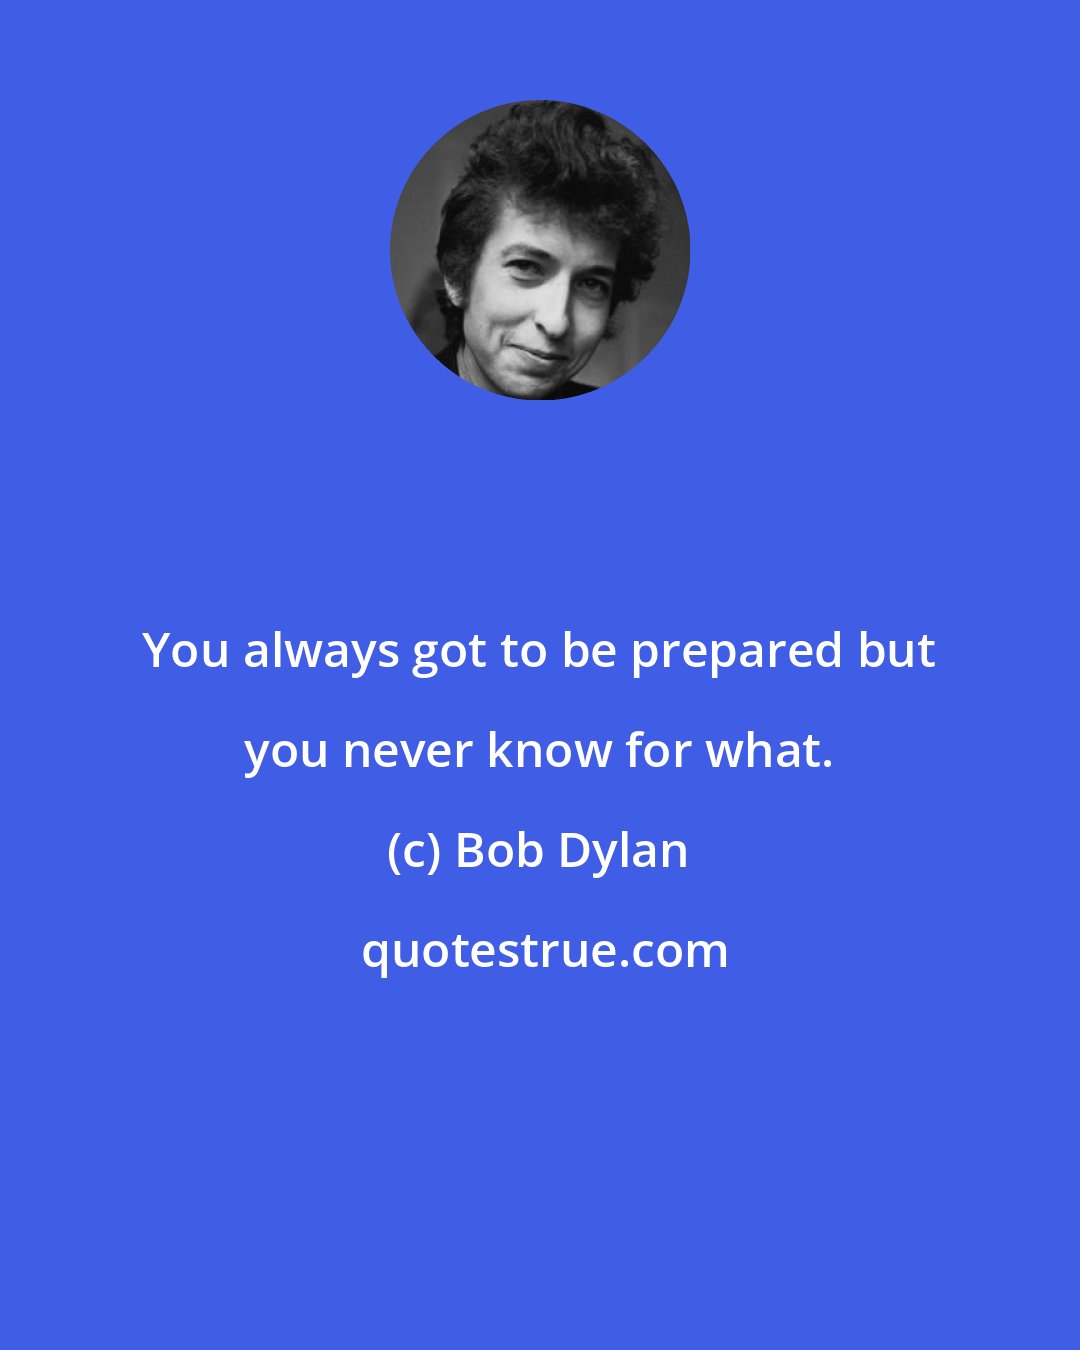 Bob Dylan: You always got to be prepared but you never know for what.